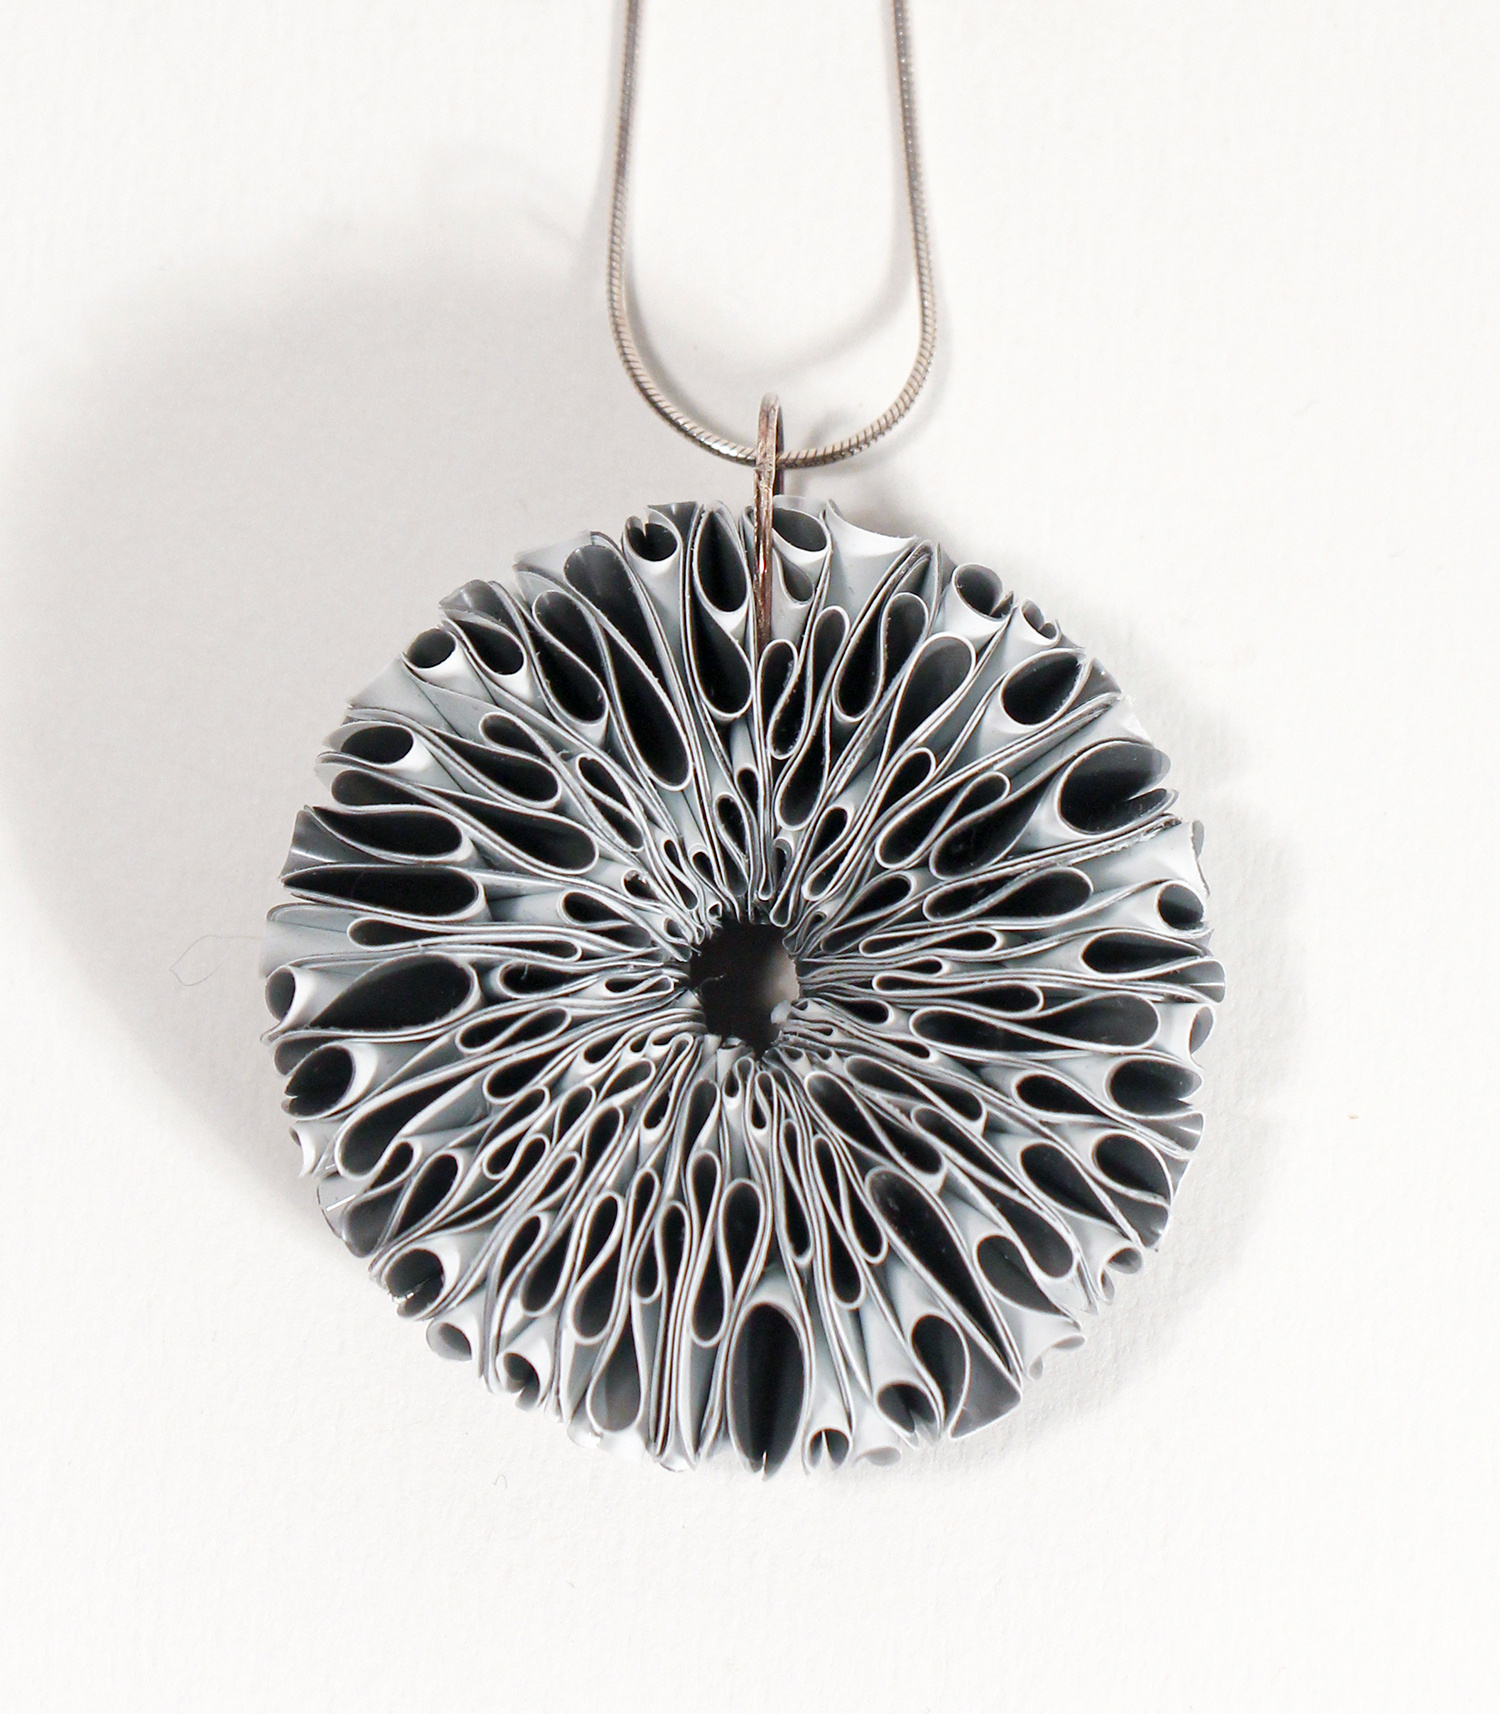 Necklace, Large Daisy by Rachel Darbourne